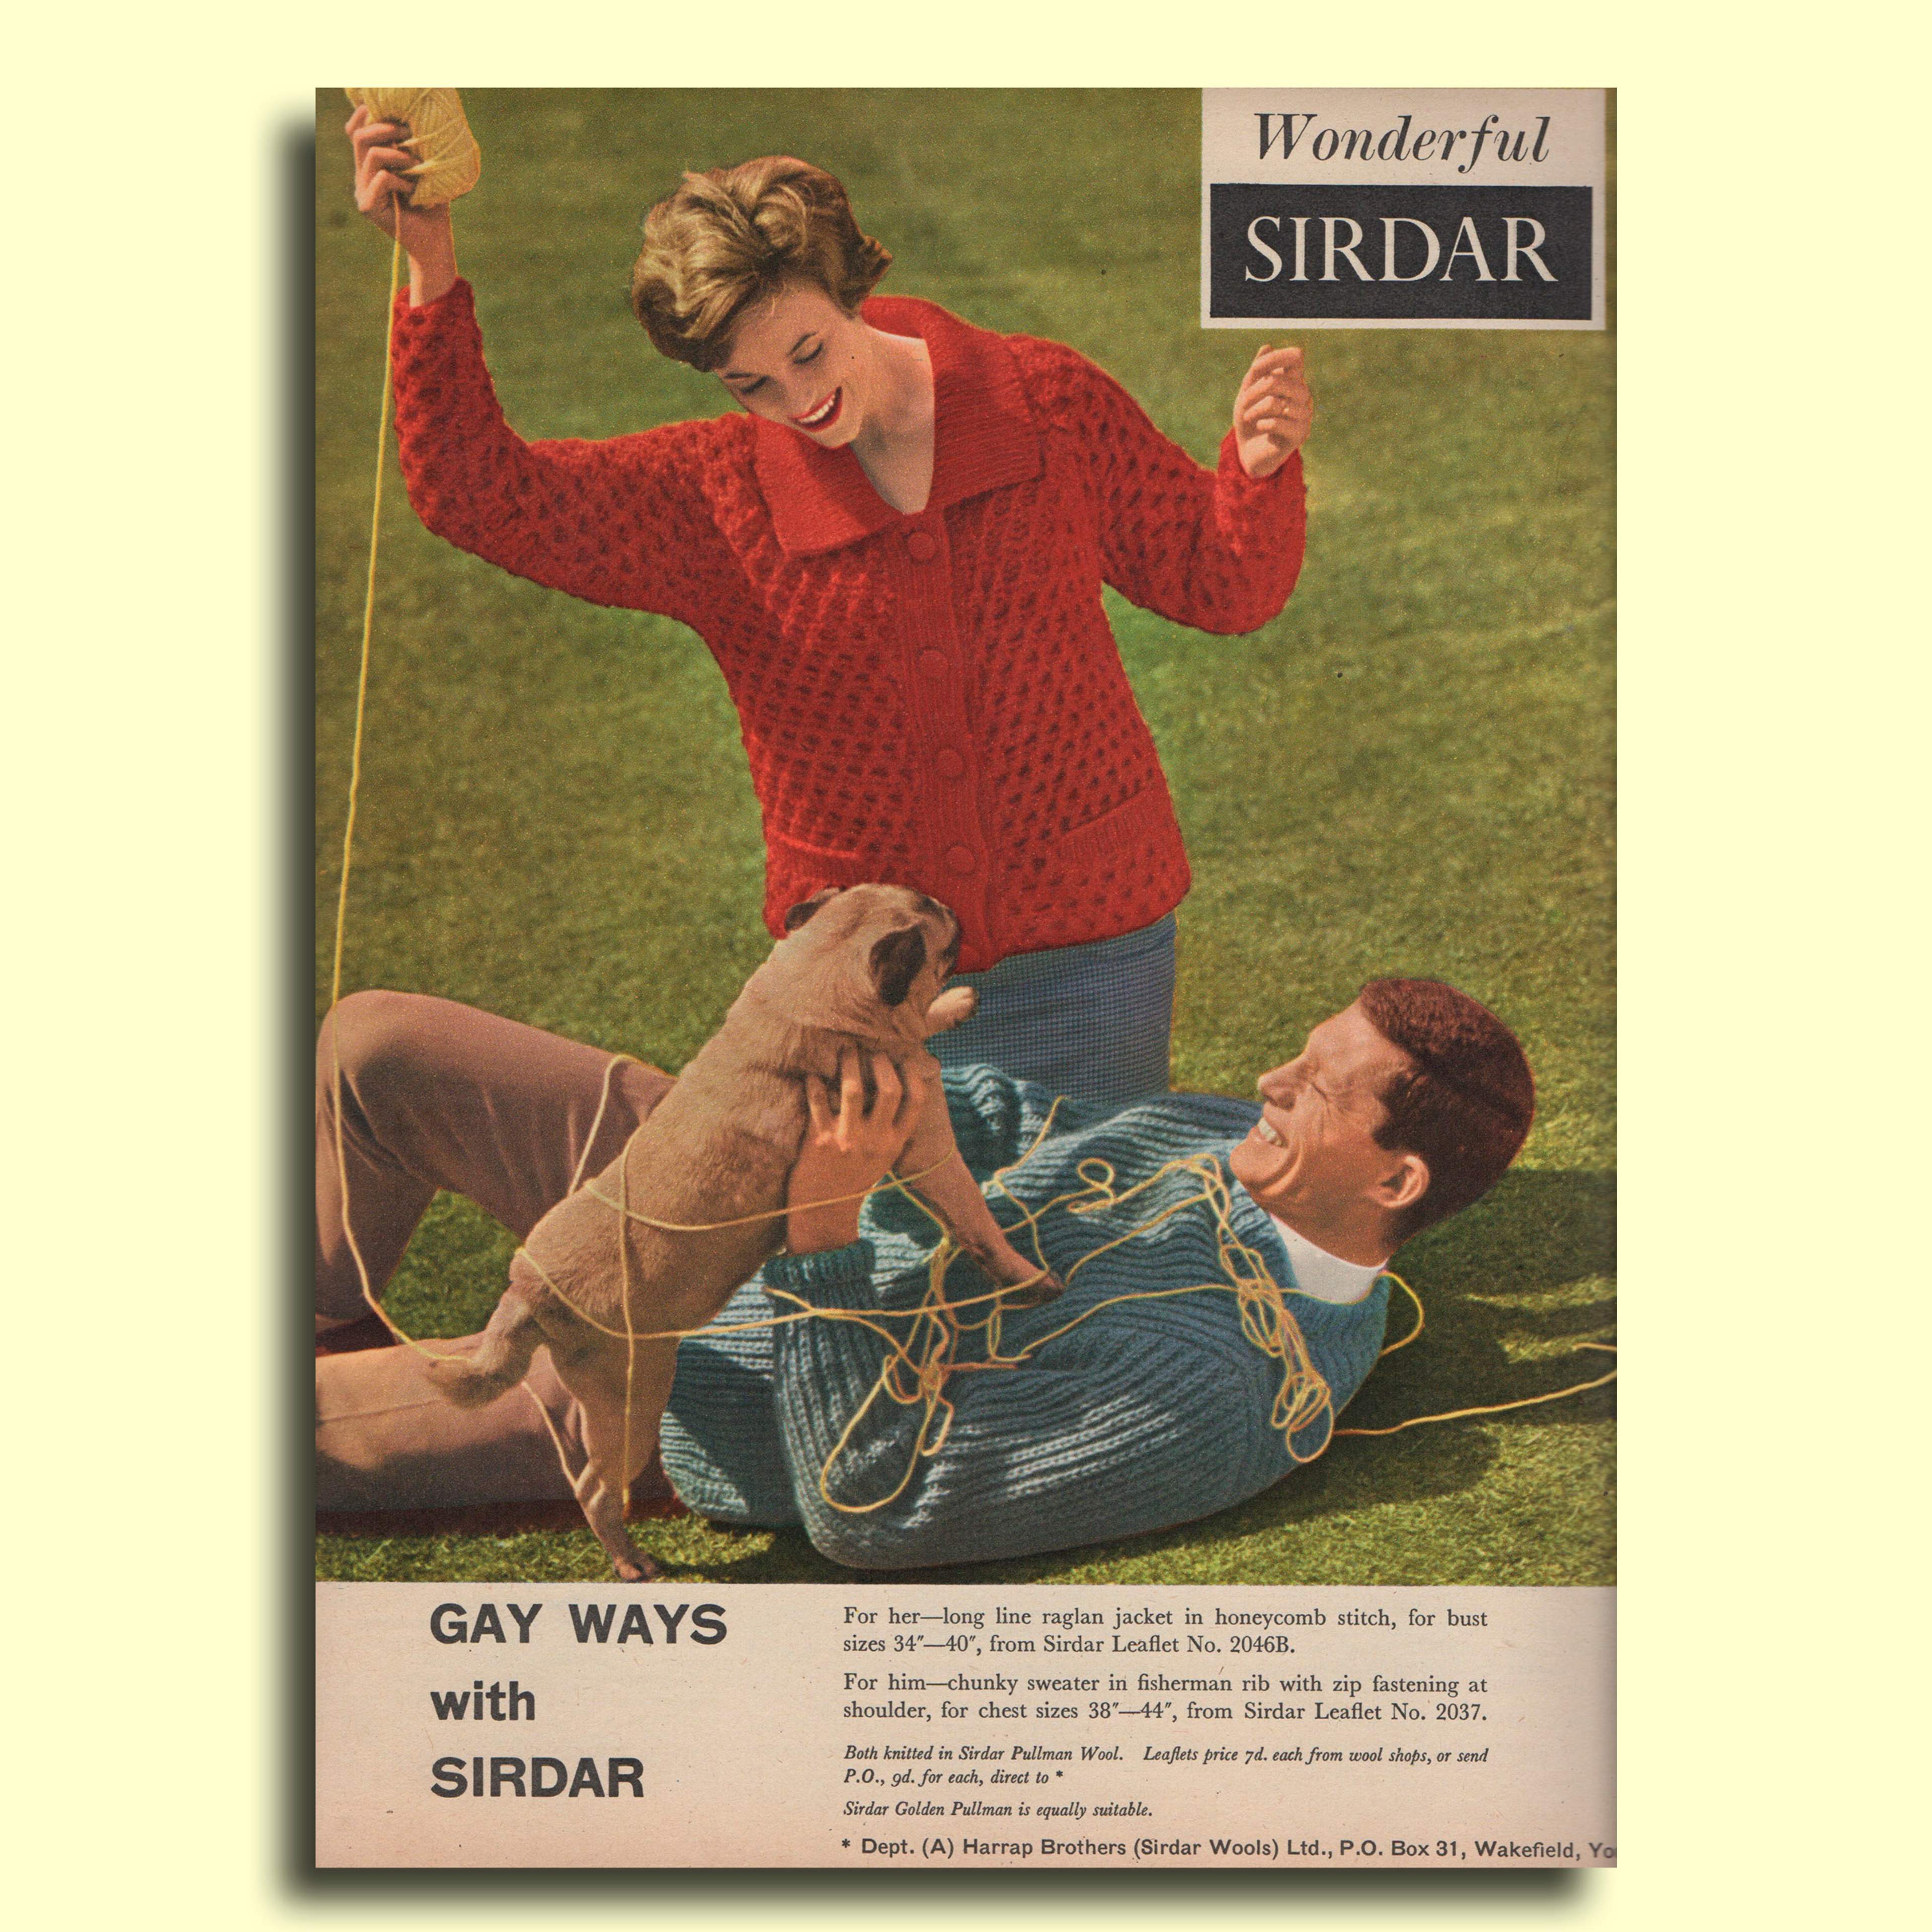 1962 Sirdar wool advert. Colour photograph of a man and woman playing with a small dog and a ball of Sirdar wool.